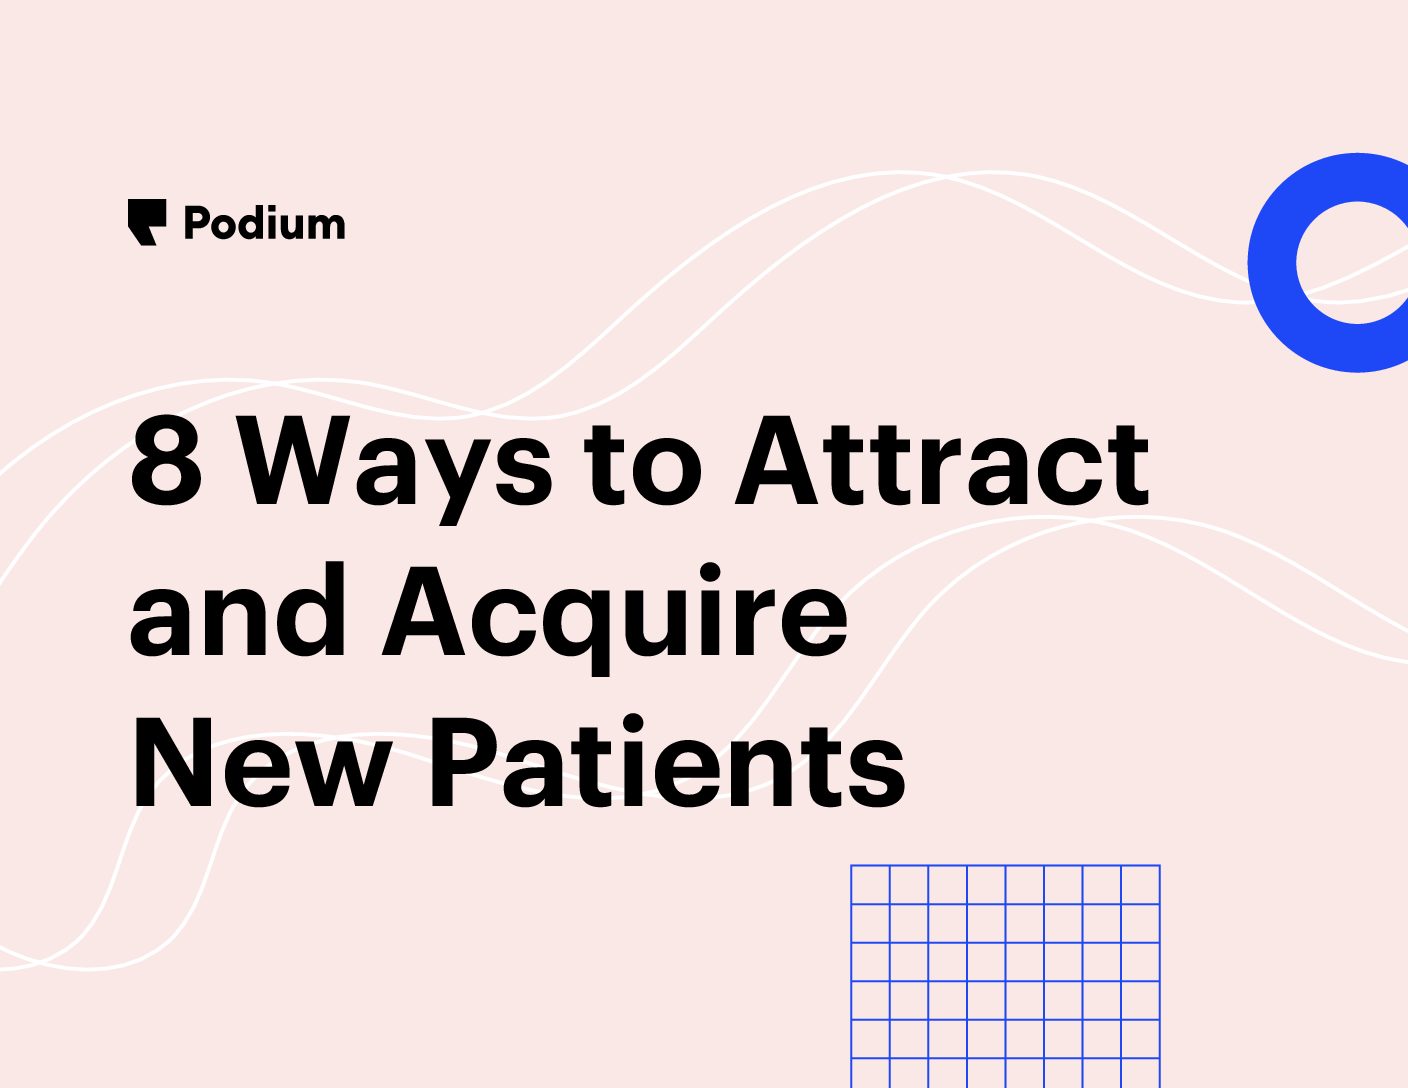 8 Ways to Attract and Acquire New Patients